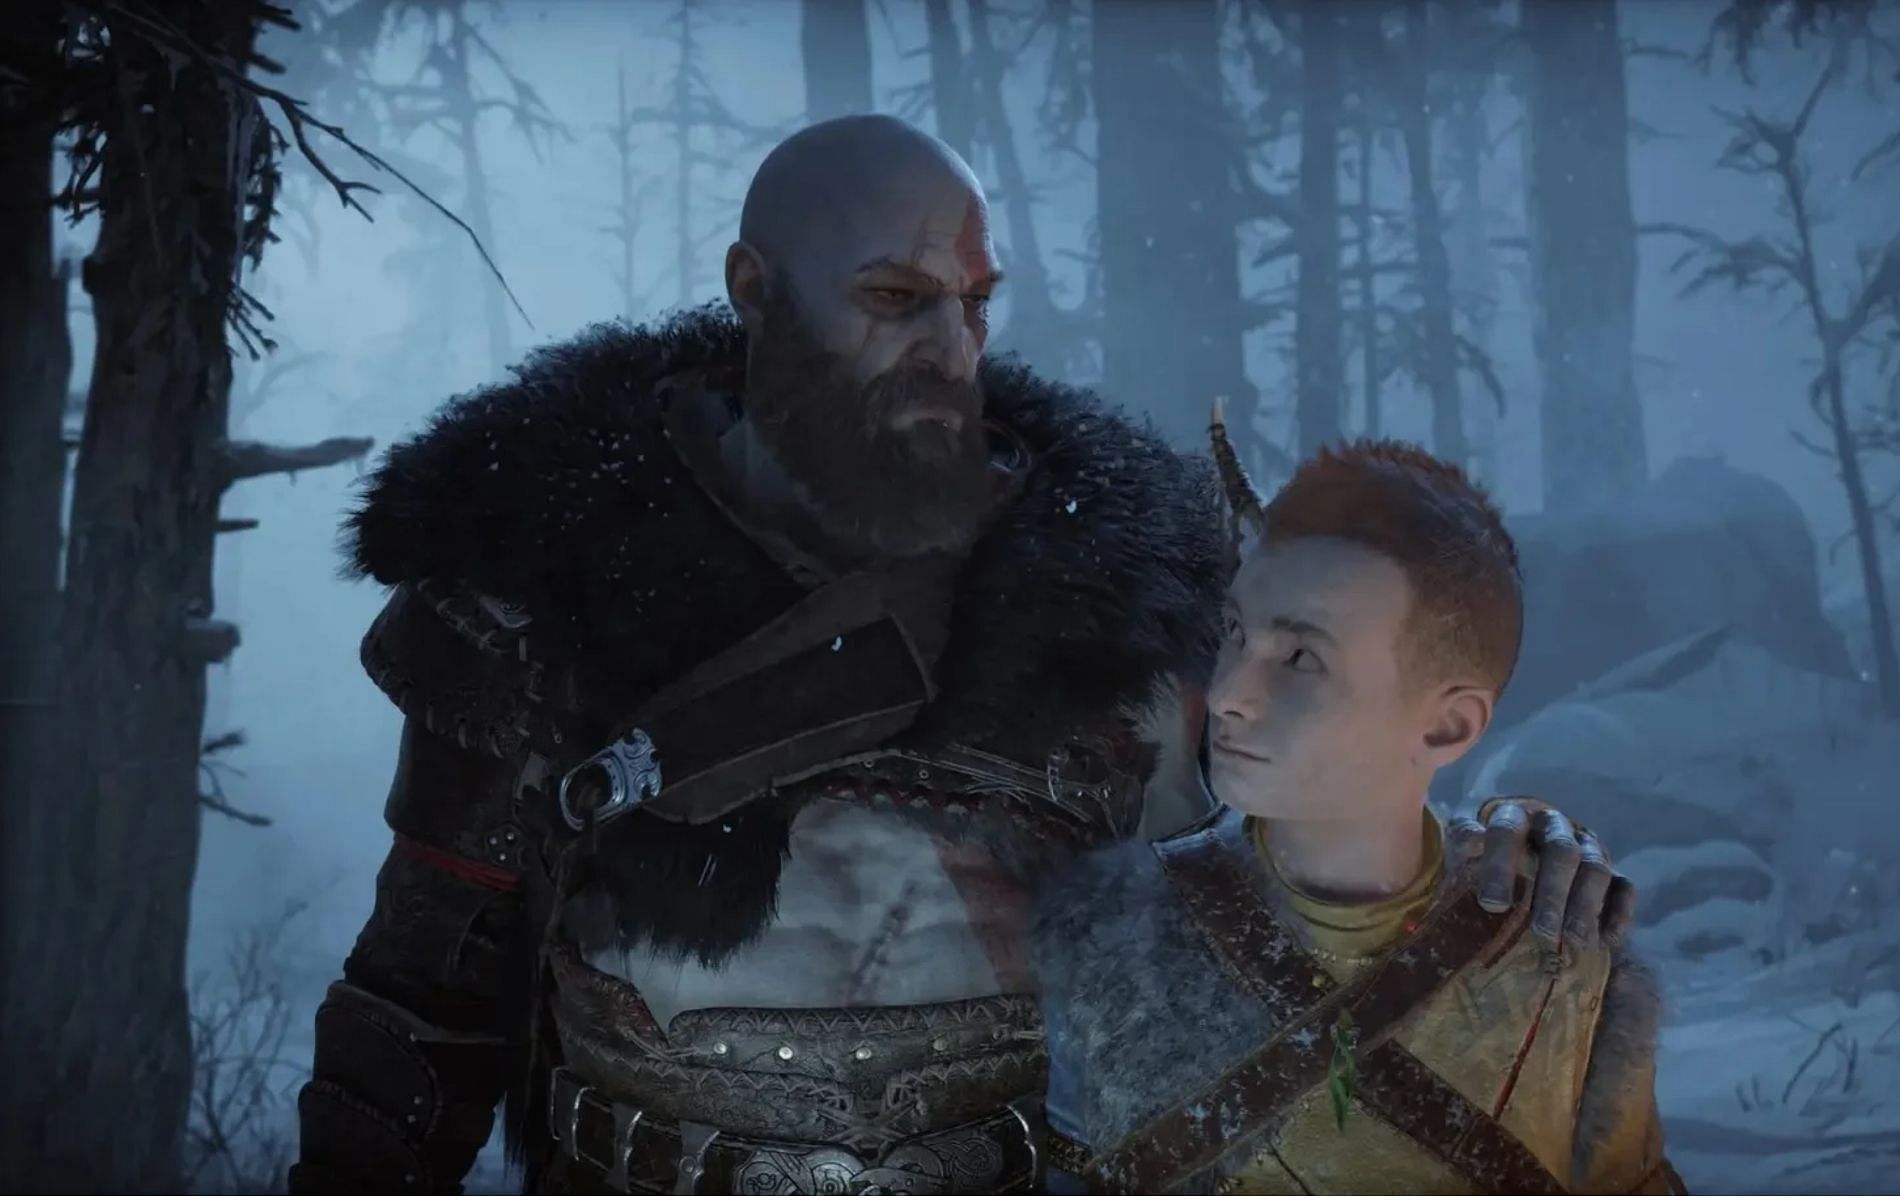 God of War Ragnarok PC Release Potentially Hinted - The Tech Game